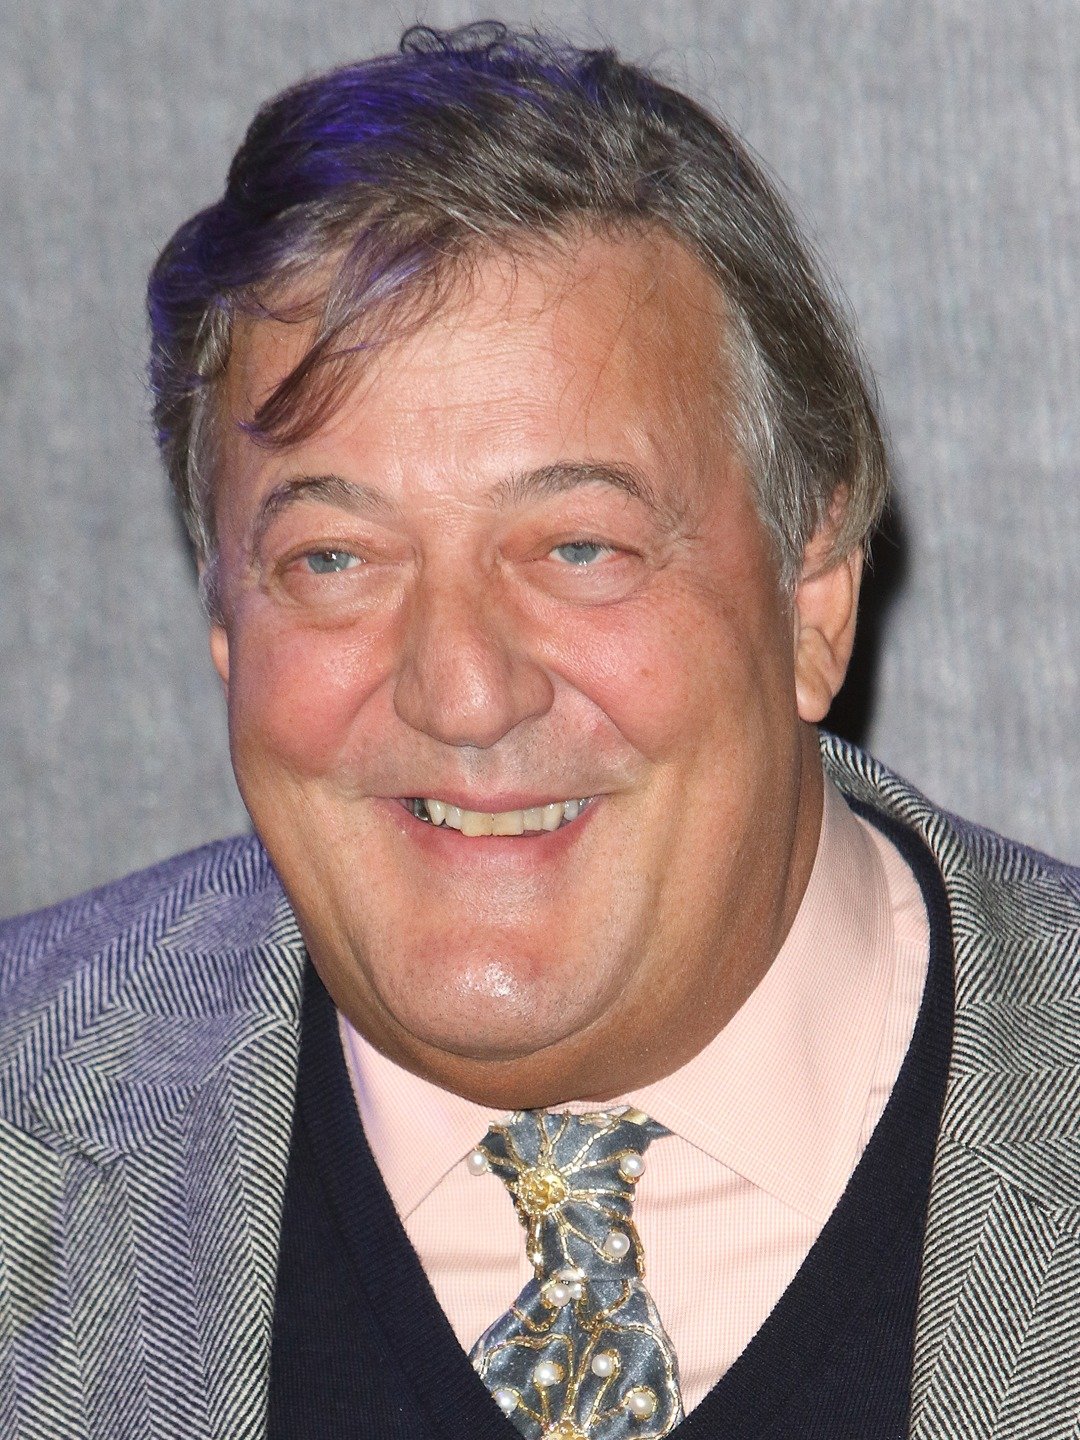 How tall is Stephen Fry?